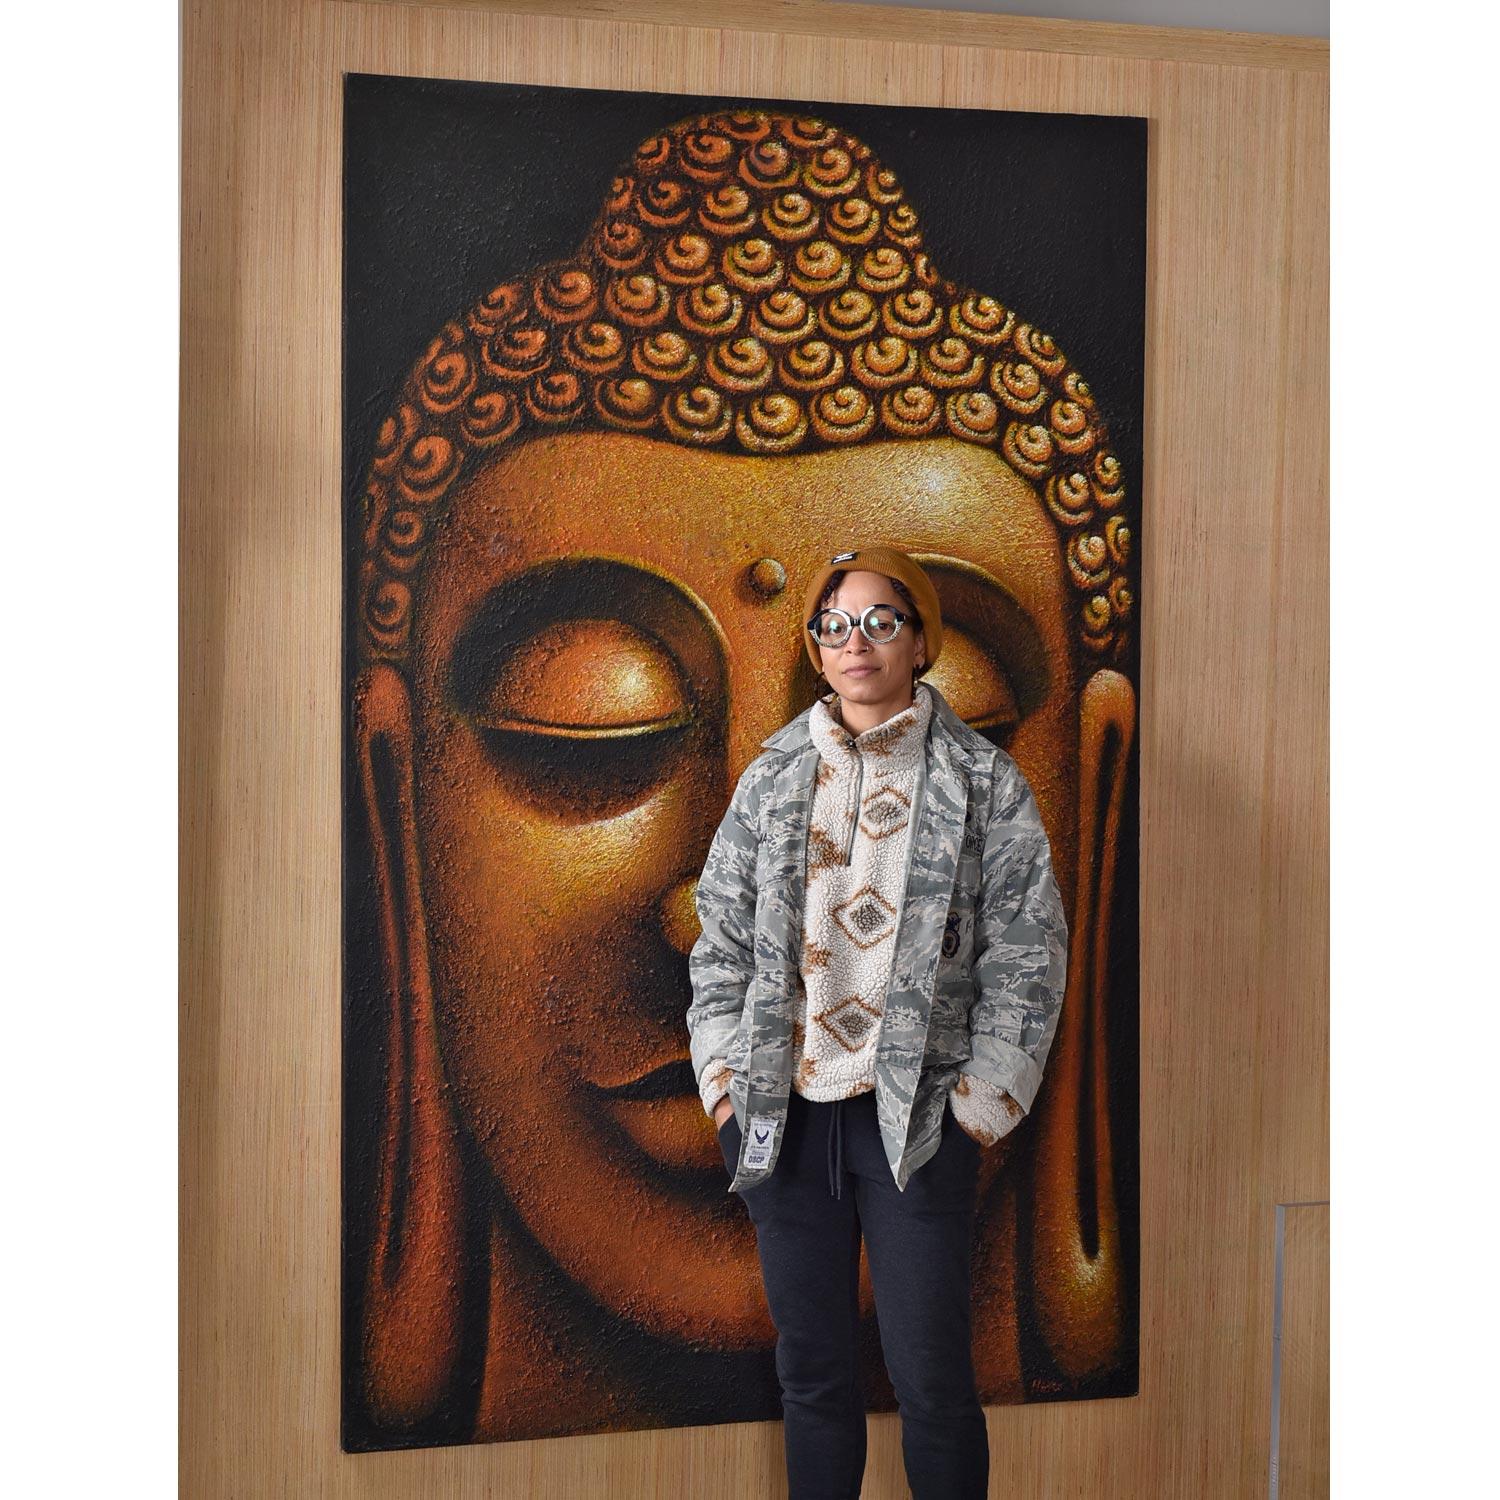 This outstanding large Buddha painting stands at six and a half feet tall! The face of Buddha is rendered in rich brown and umber tones, giving a sepia effect. Look closely to see a gritty texture throughout. We acquired this from an eclectic